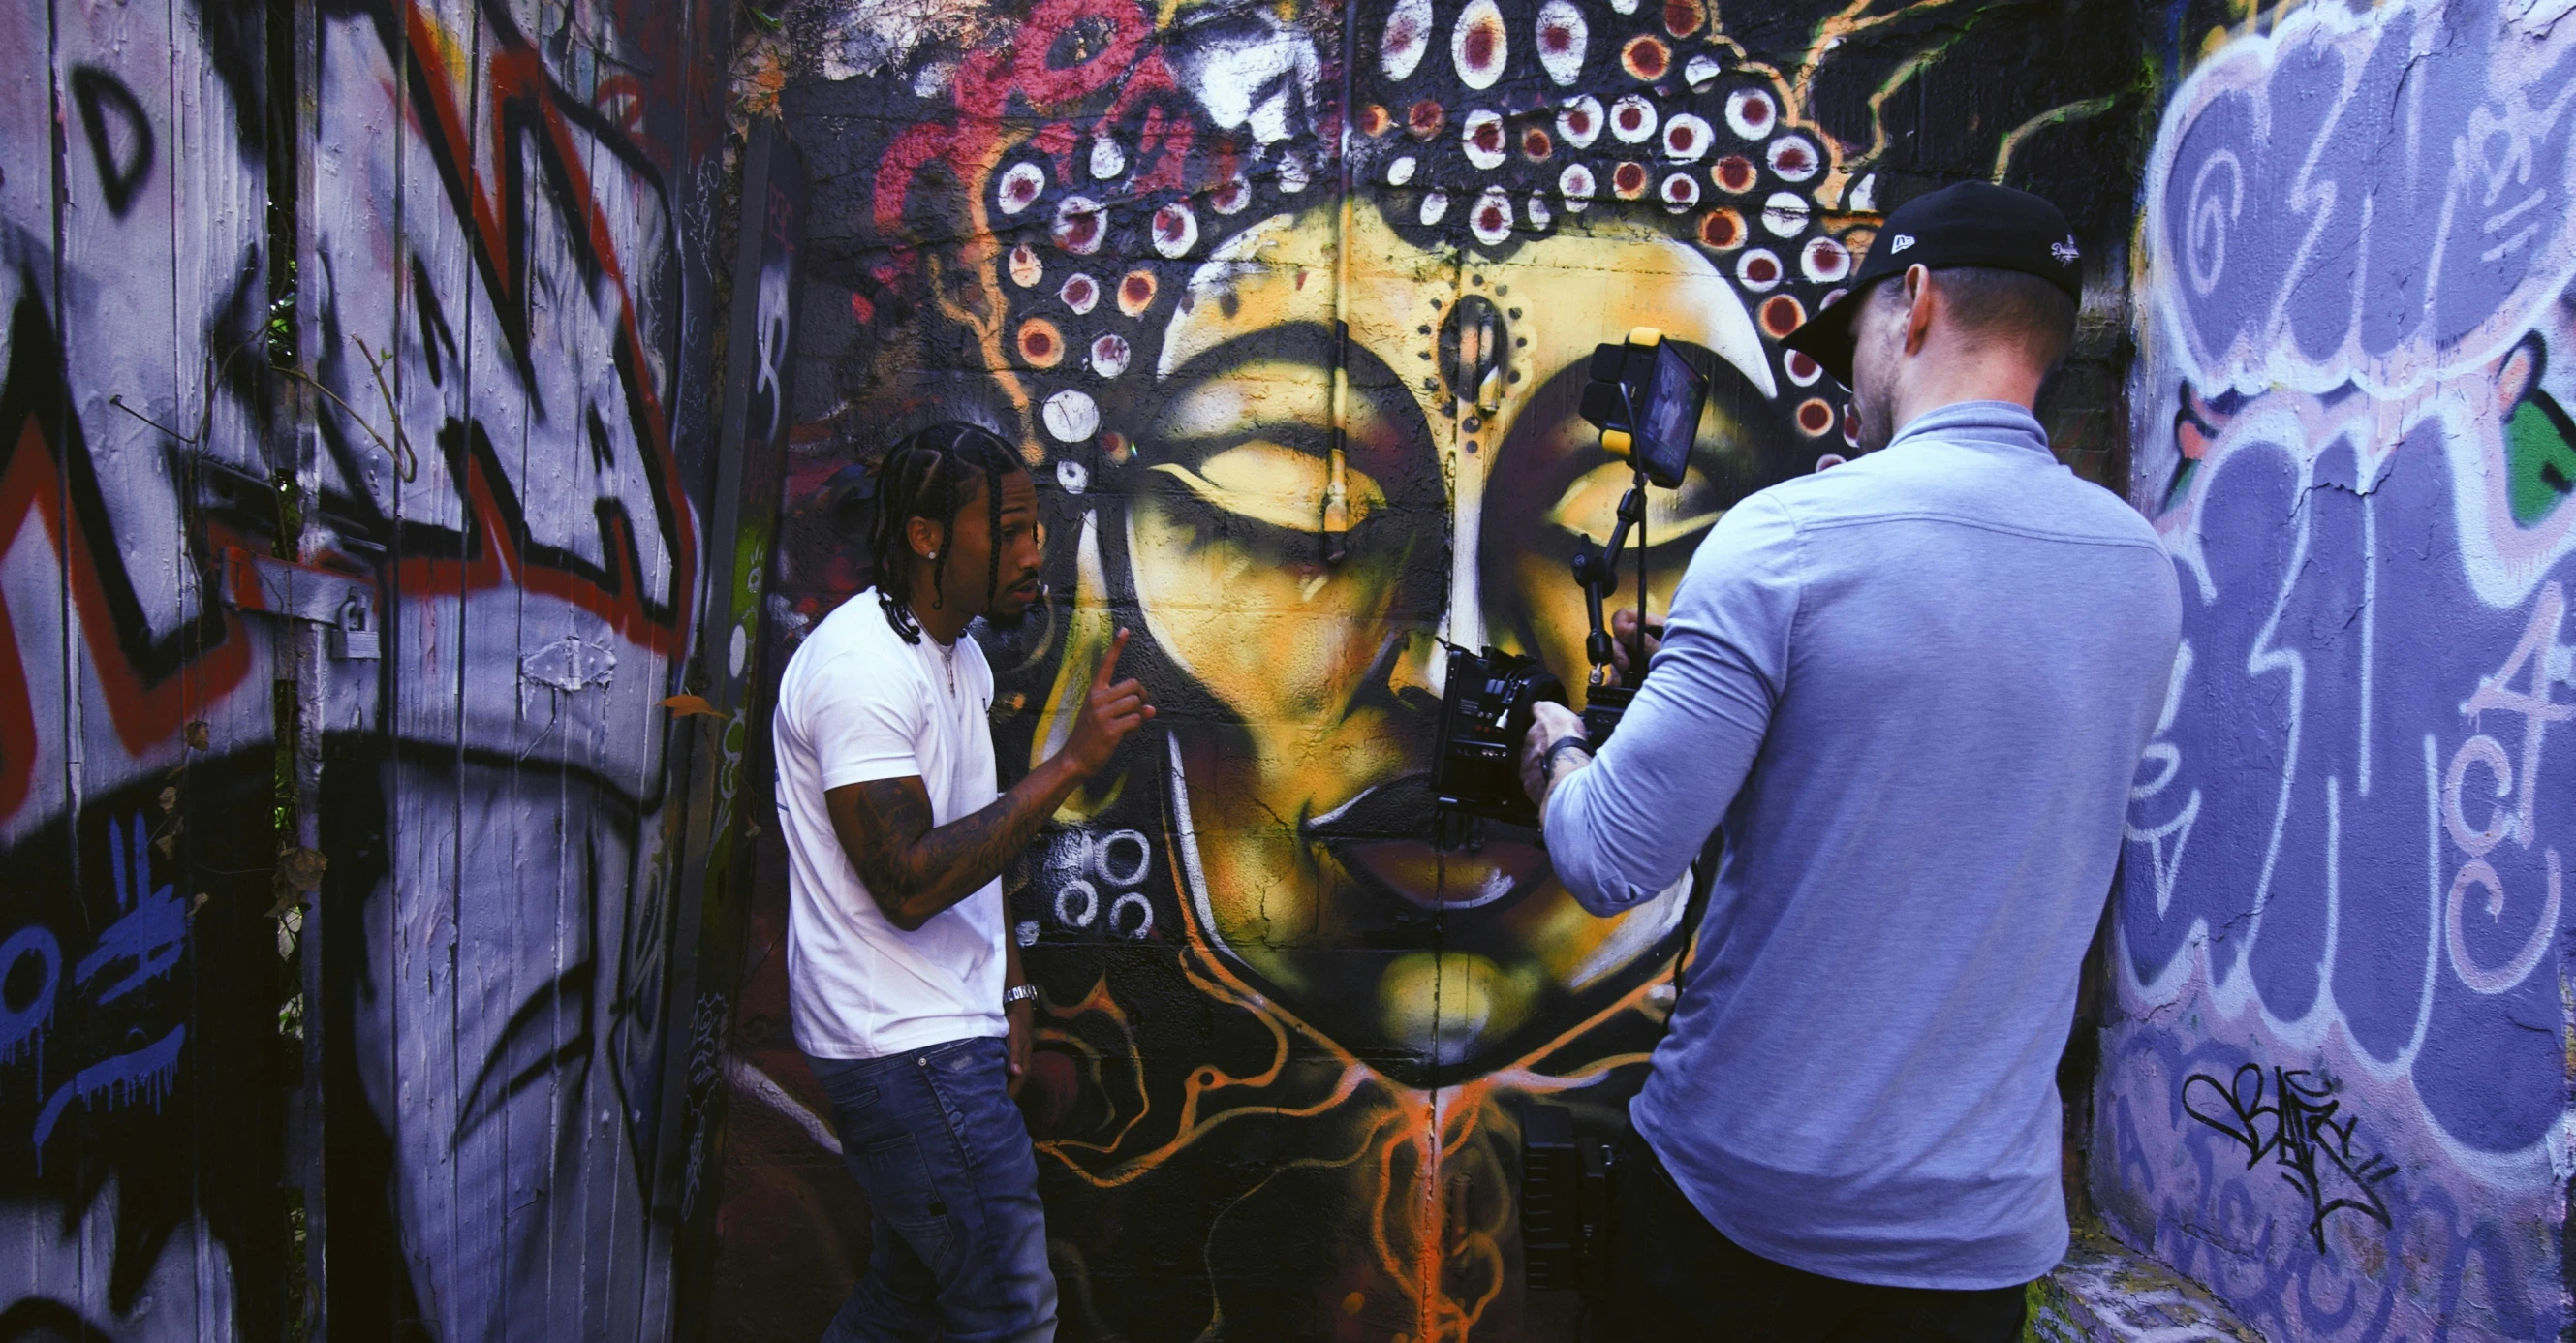 two men in front of graffiti in a city